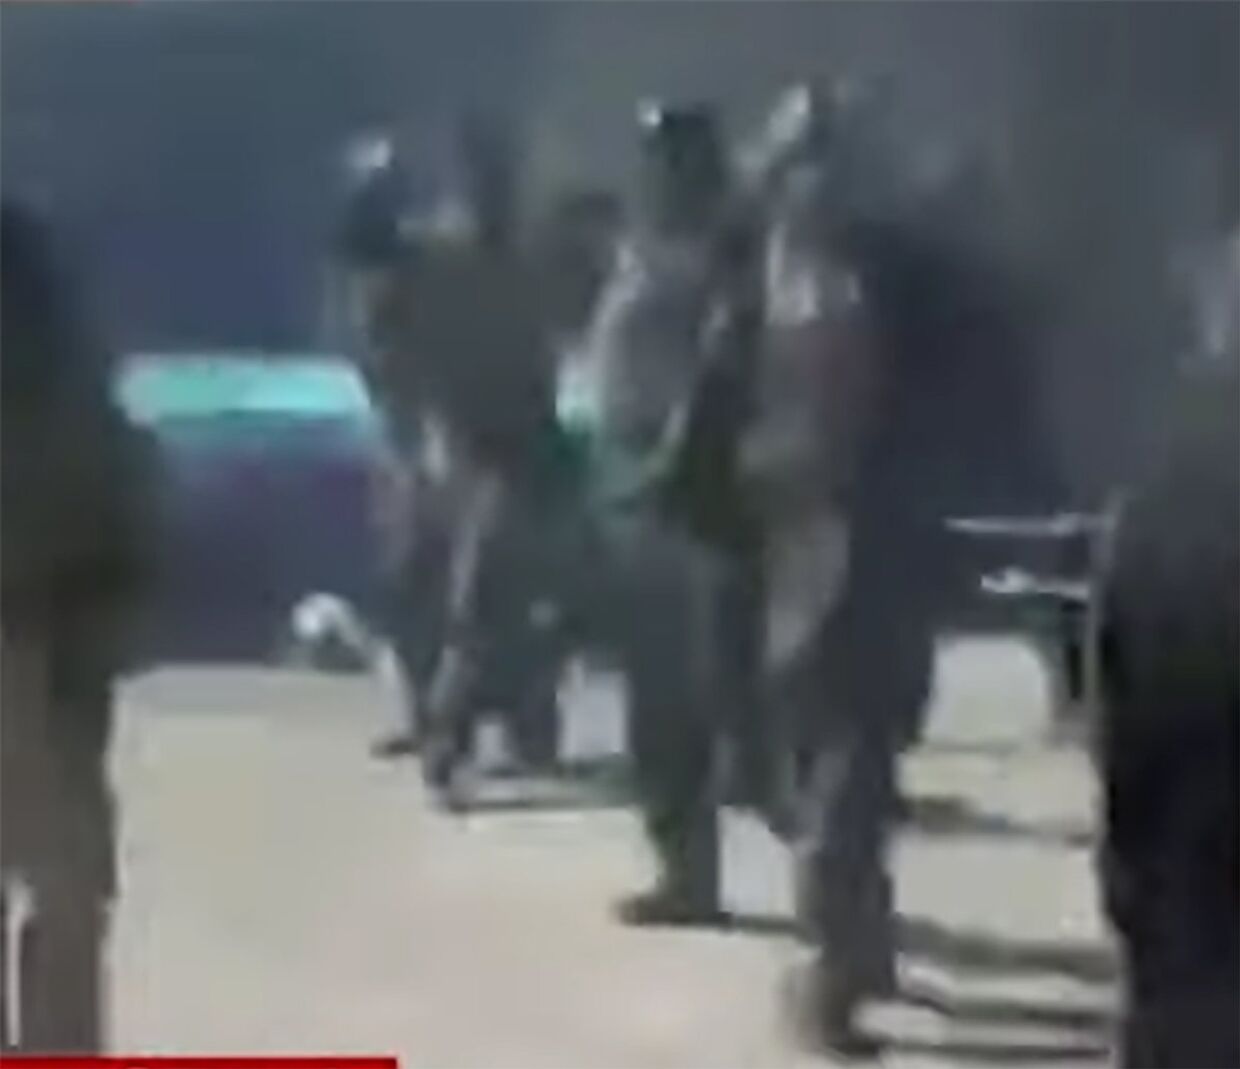 Video shows 22 Afghan commandos executed by the Taliban